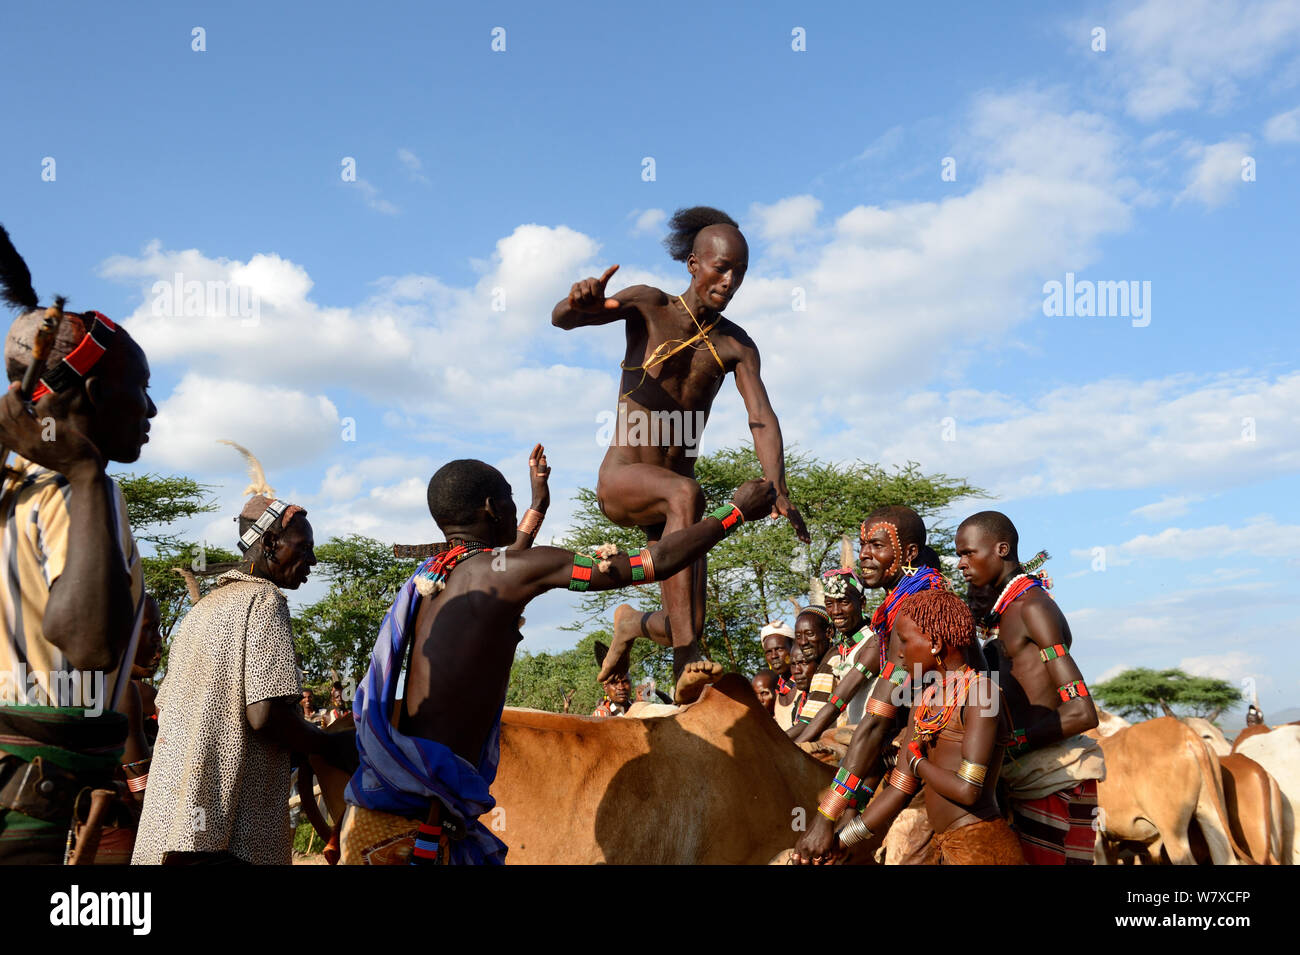 Bull jumping during the Ukuli ceremony, a rite of passage for boys to become men. Hamer tribe, Omo river Valley, Ethiopia, September 2014. Stock Photo